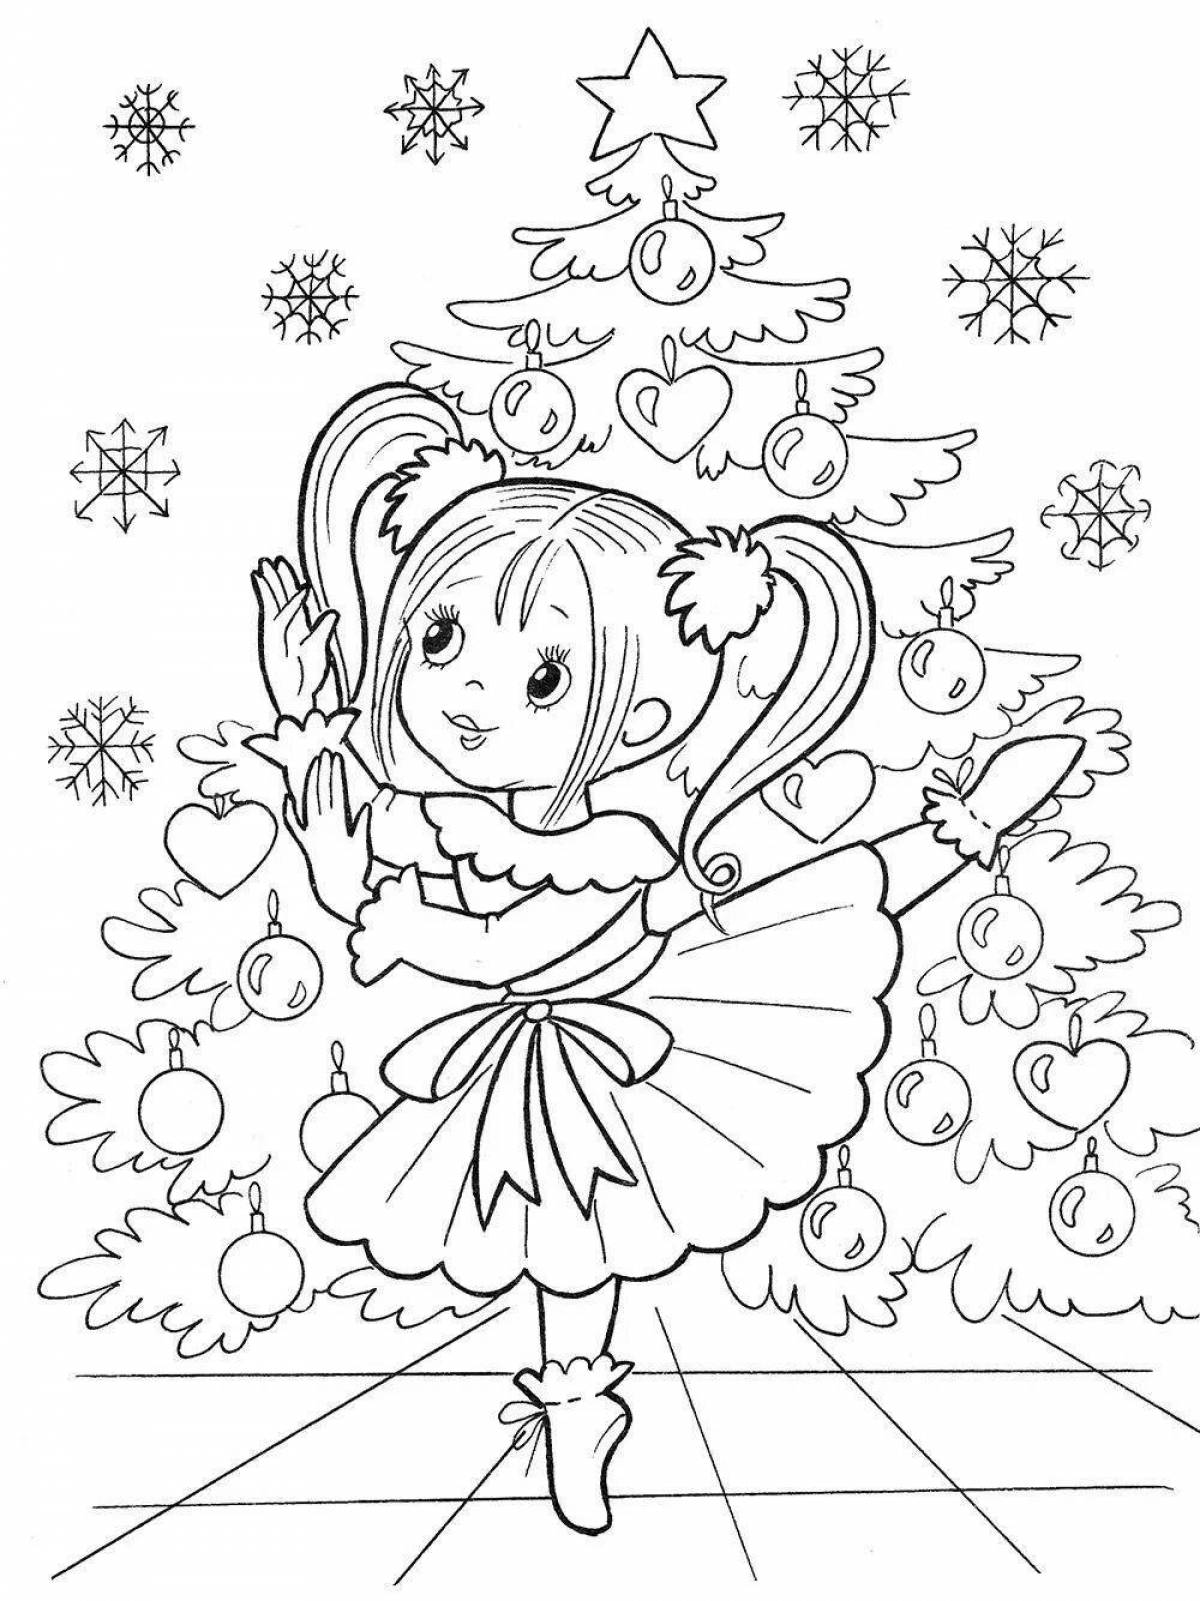 Bright Christmas coloring book for girls 12 years old